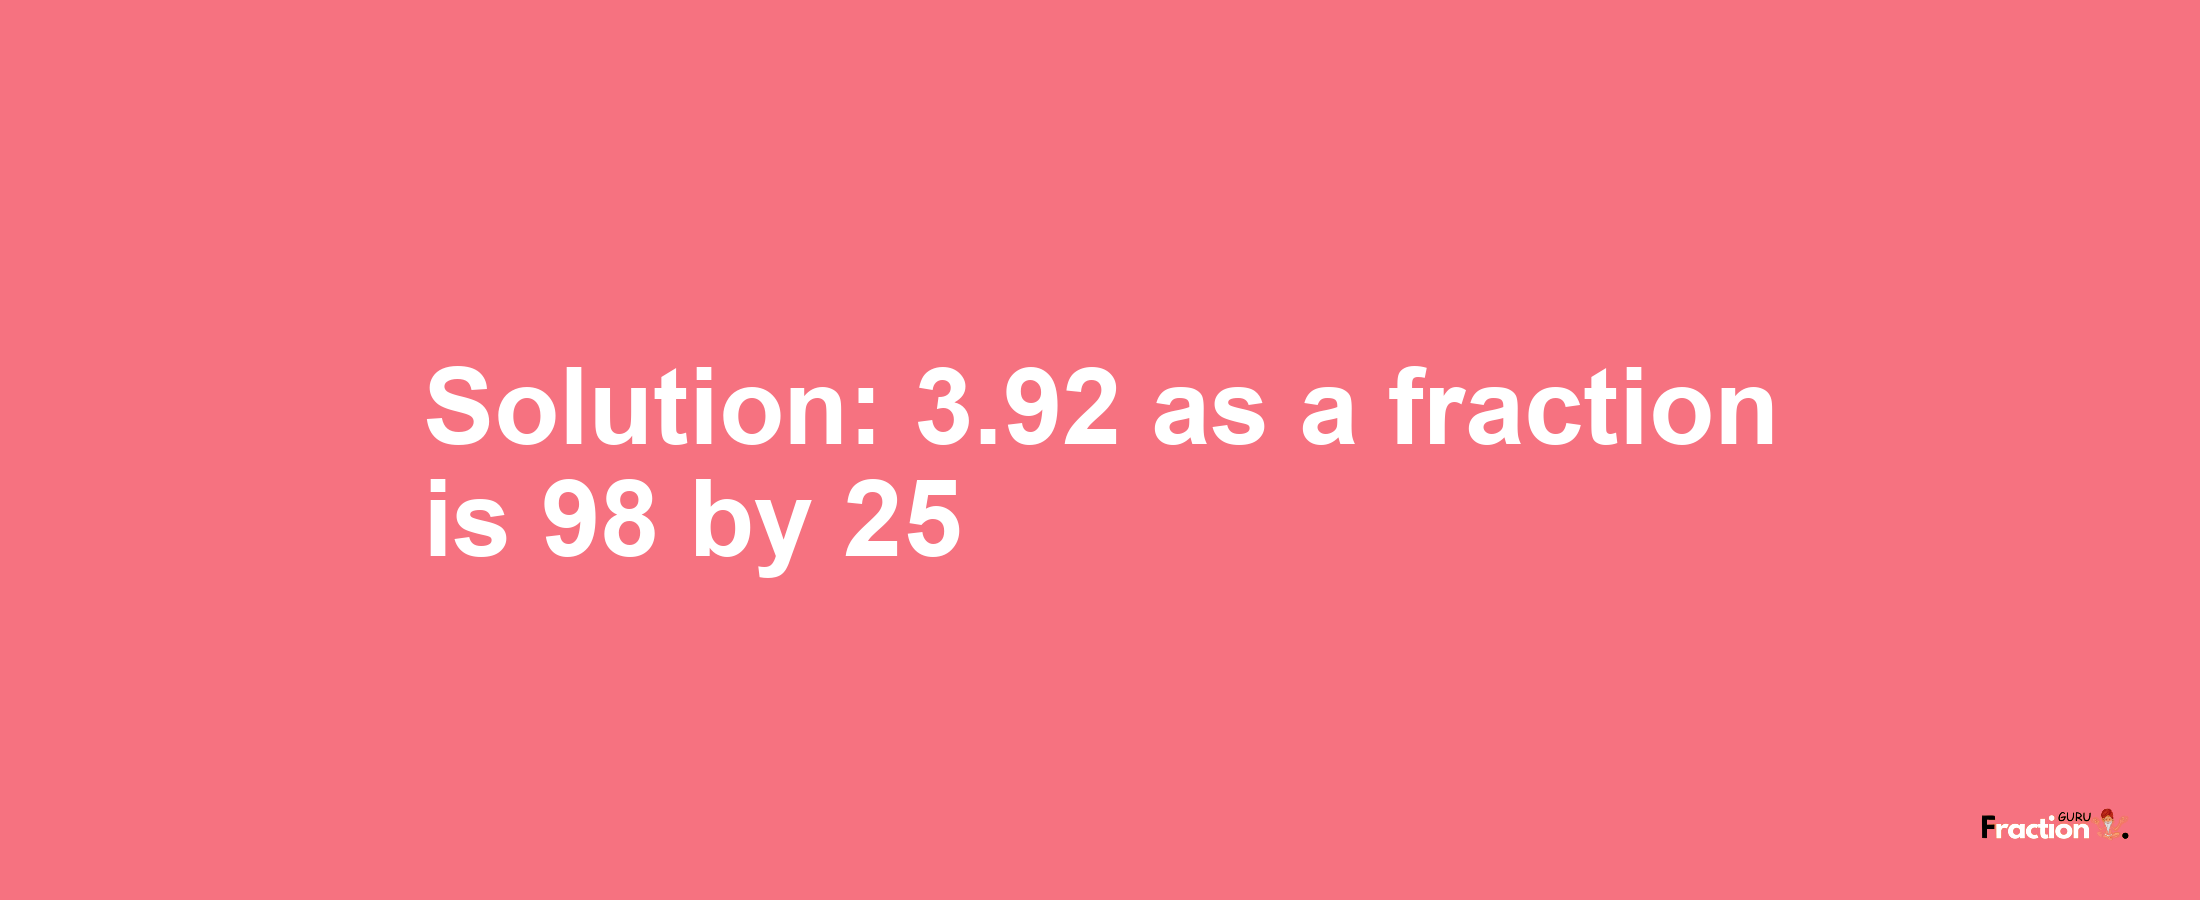 Solution:3.92 as a fraction is 98/25